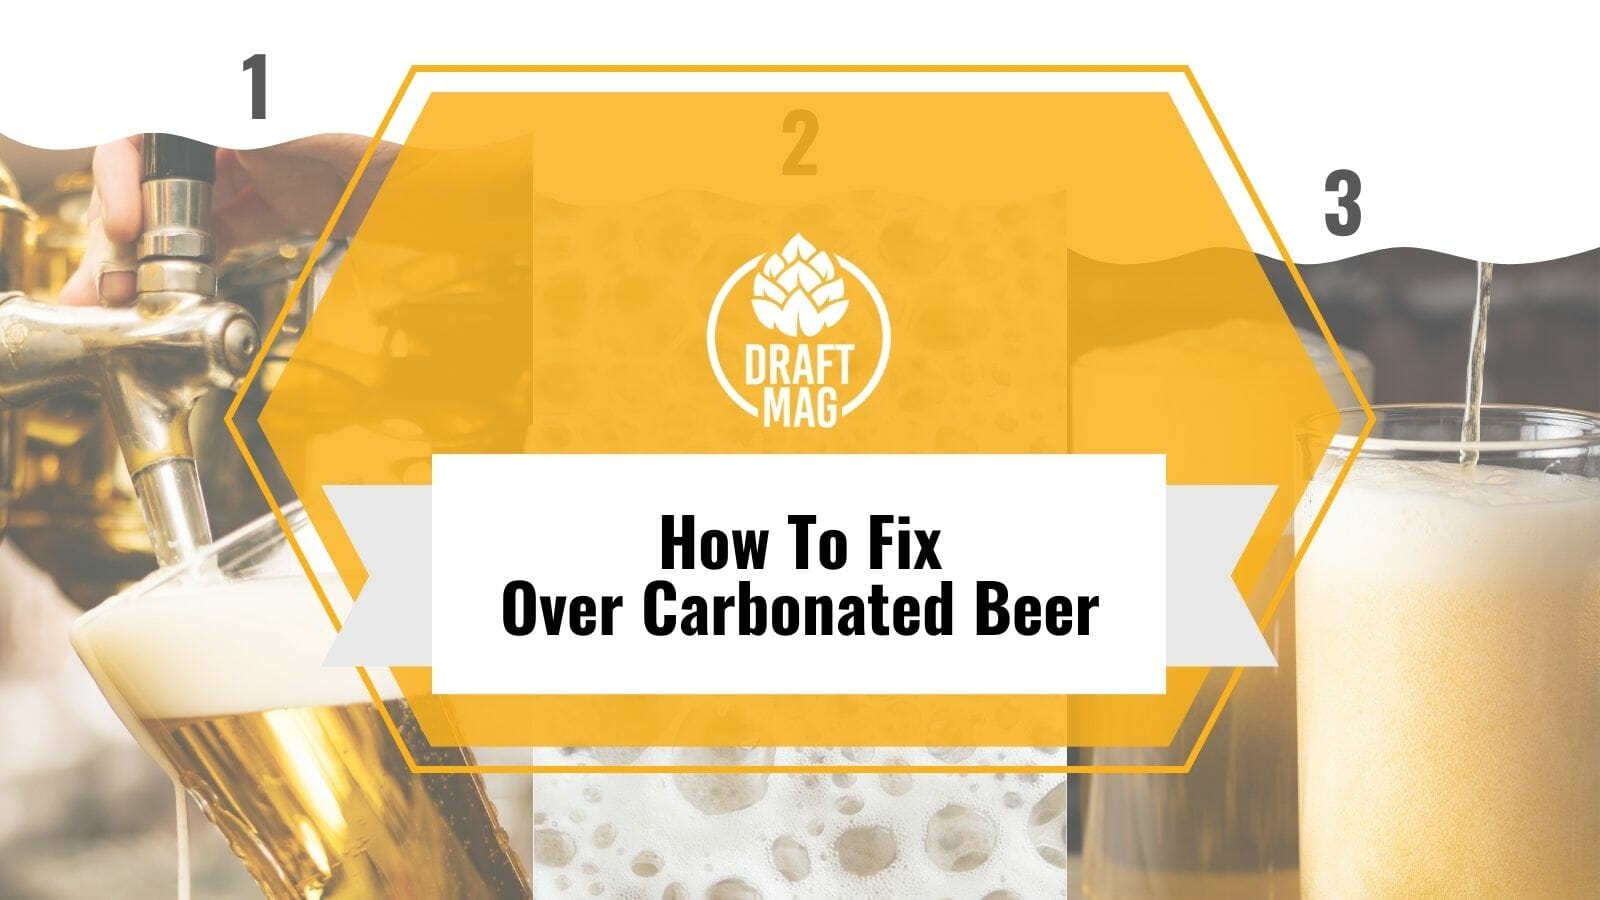 How To Fix Over Carbonated Beer